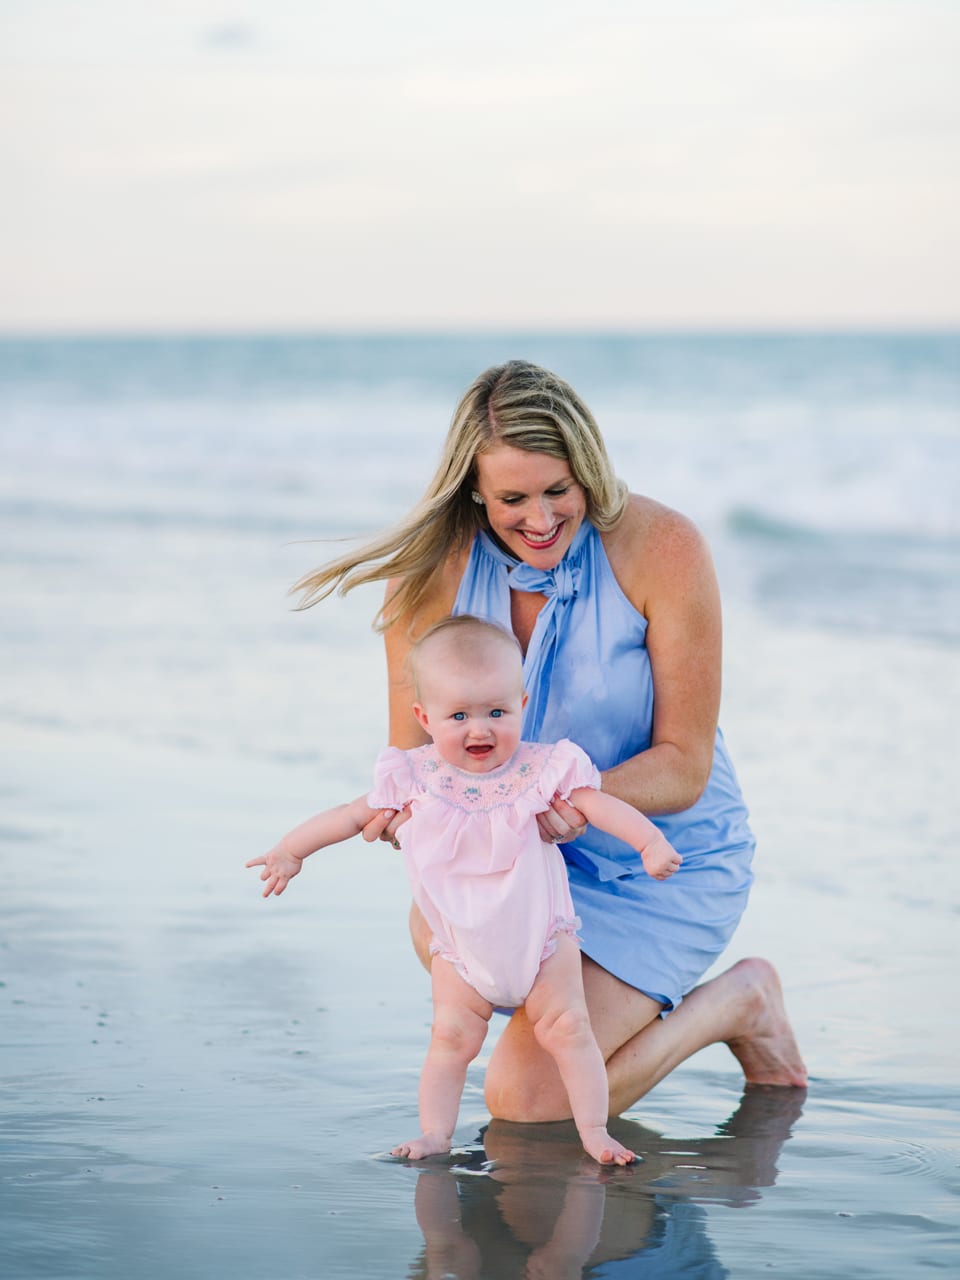 This Pawleys Island Family Photo session took place near their home. A gorgeous Beach loaction in Pawleys Island